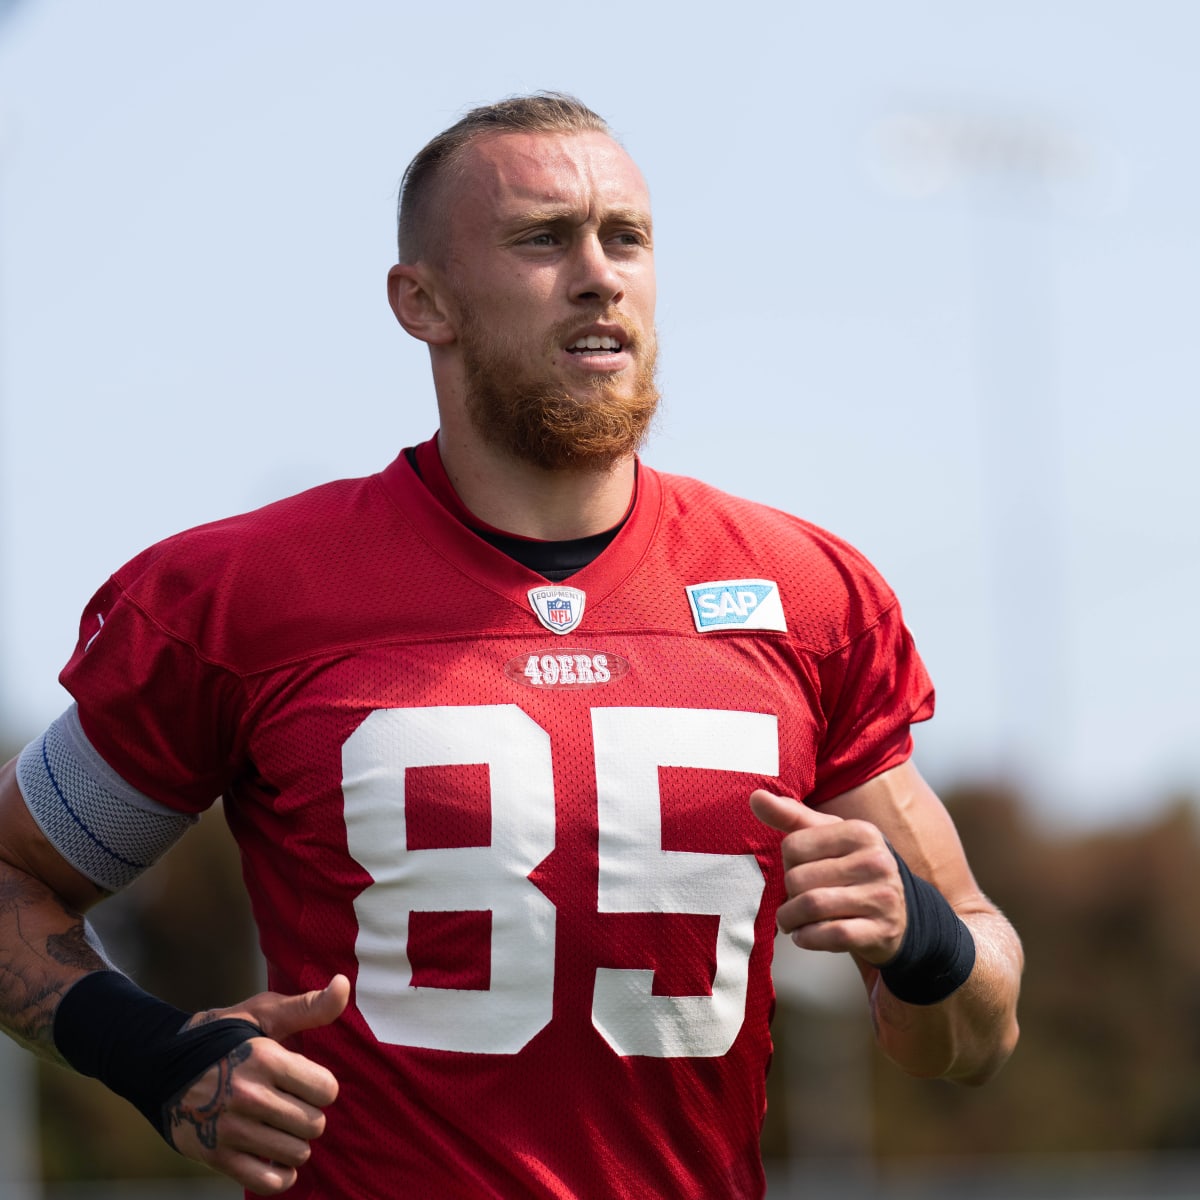 San Francisco 49ers - You could win tickets, a George Kittle